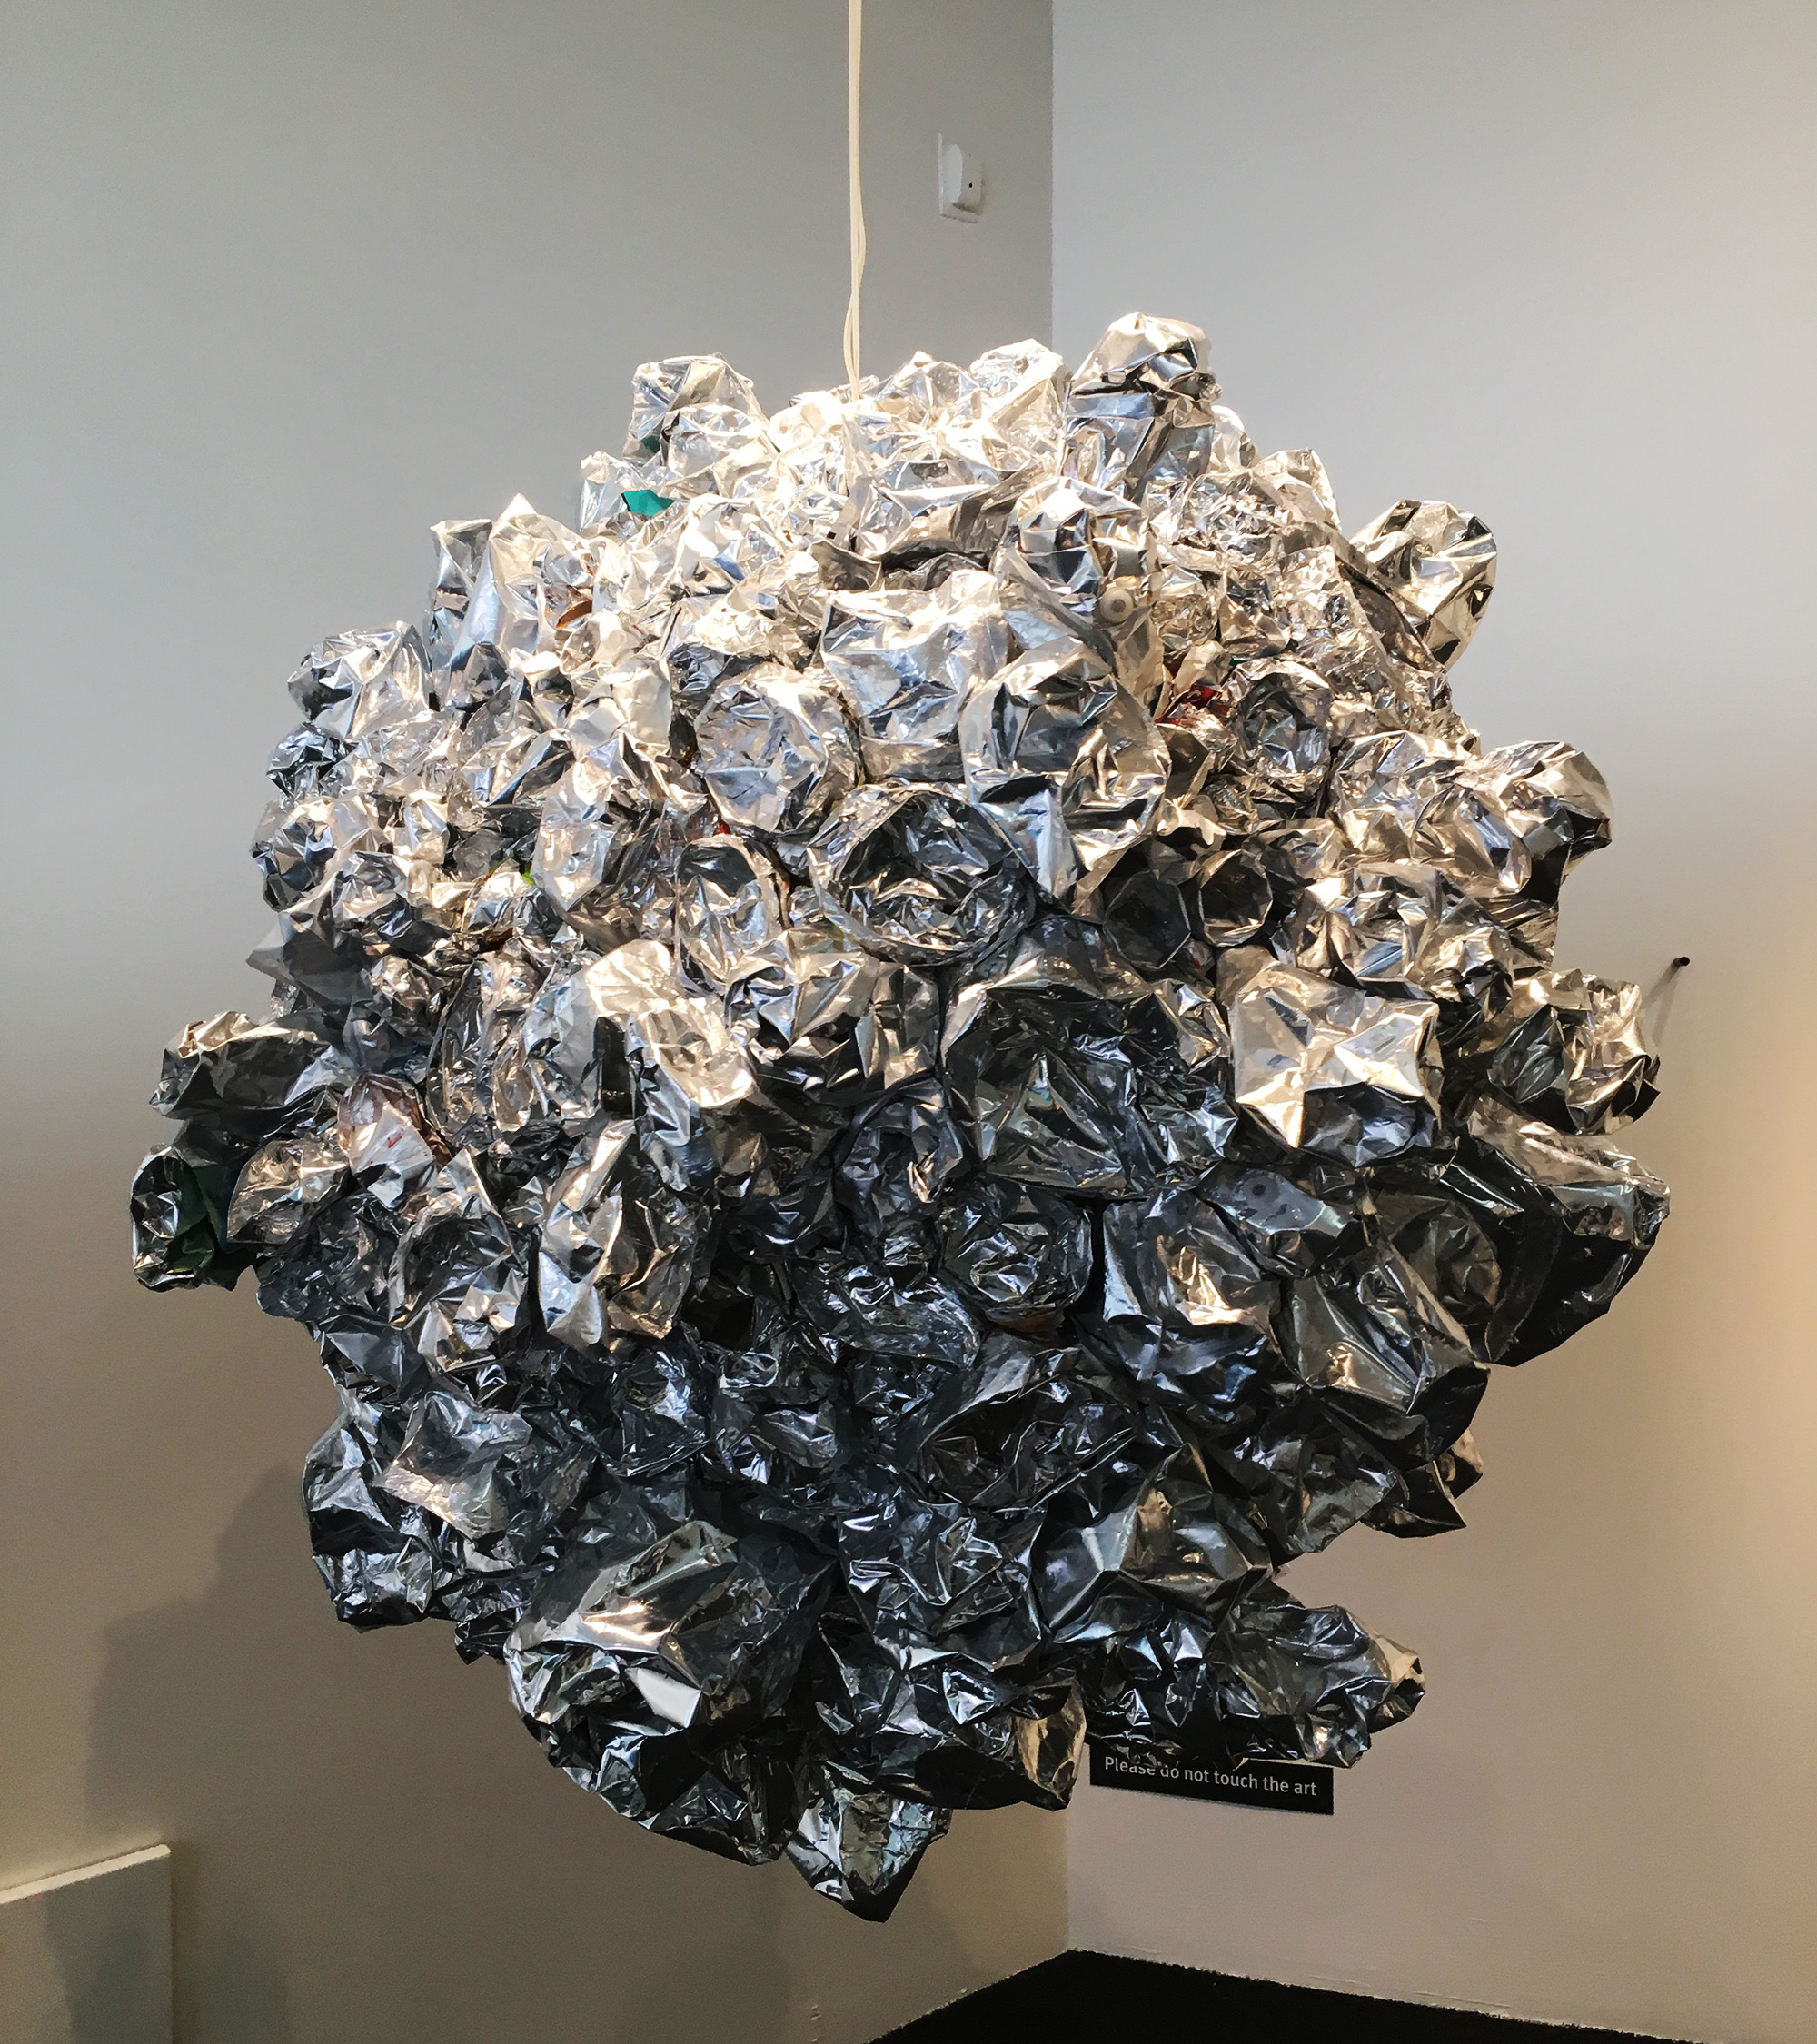 By Maria Phillips, Disco Ball created with recycled chip bags.